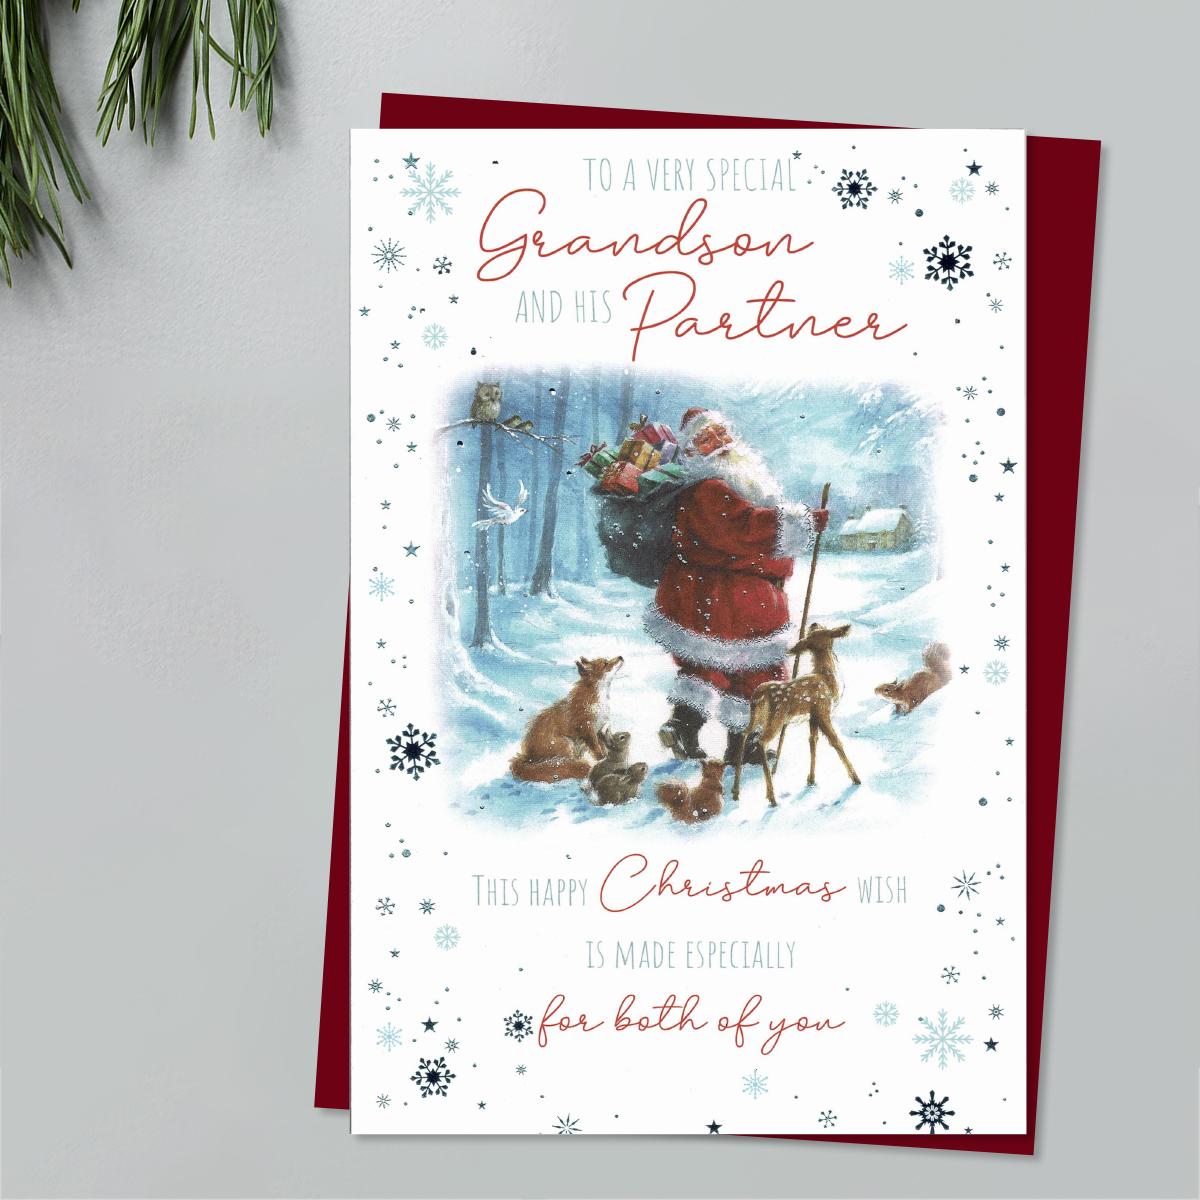 Very Special Grandson & Partner Christmas Card Front Image